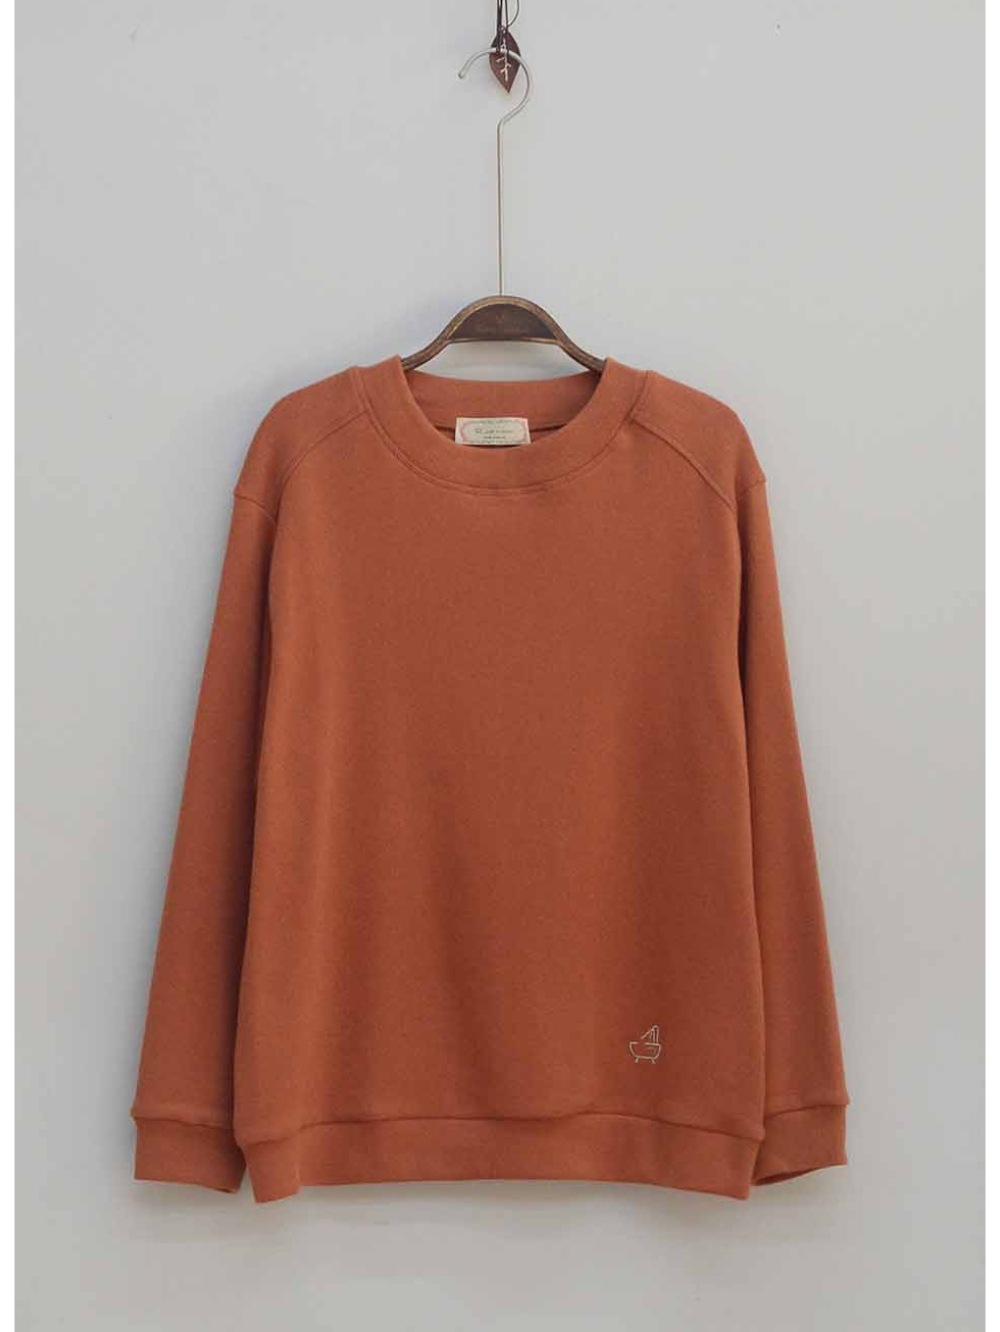 long sleeved tee brown color image-S1L53